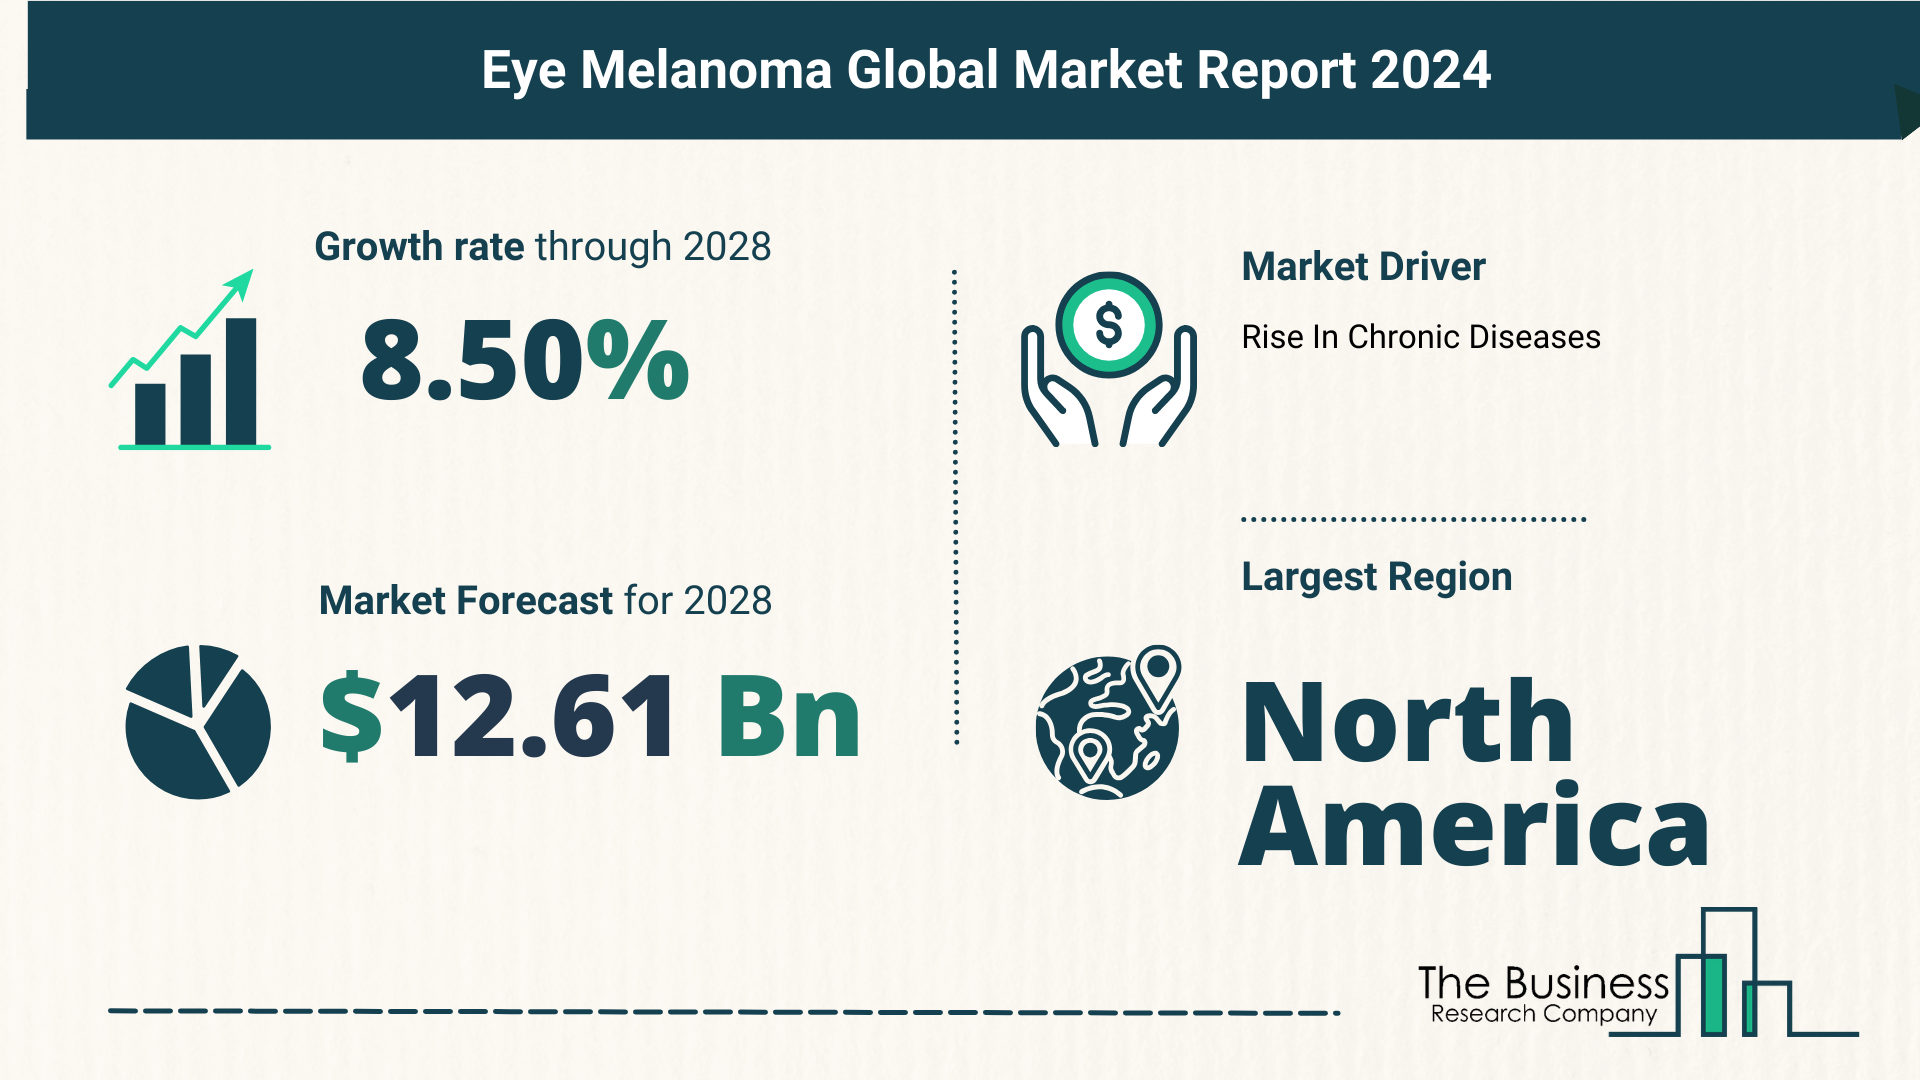 Key Trends And Drivers In The Eye Melanoma Market 2024